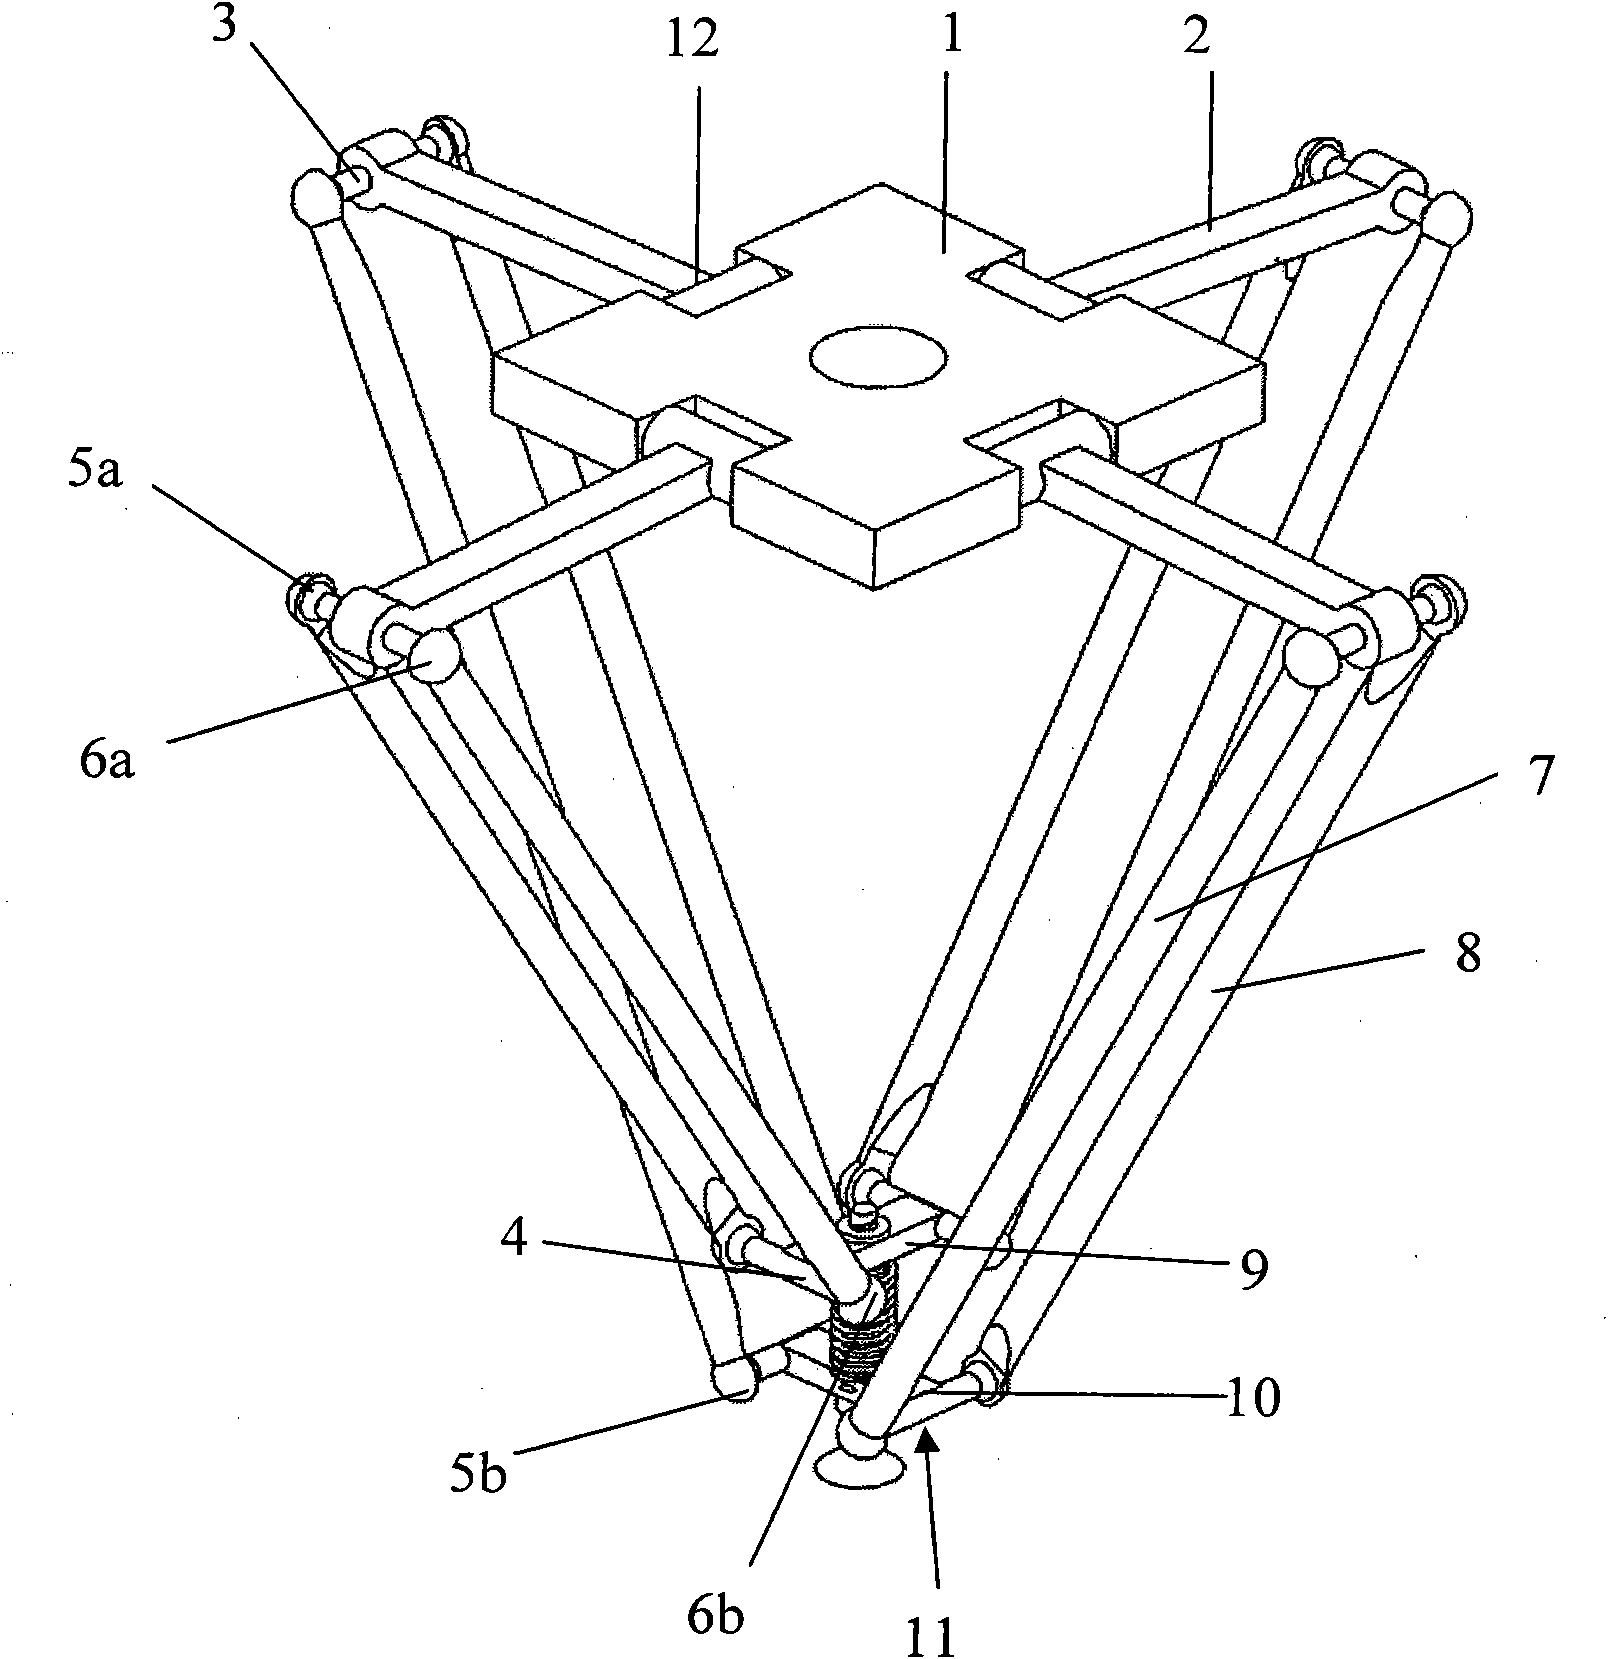 Three-dimensional translation and one-dimensional rotation parallel mechanism capable of realizing high-speed movement